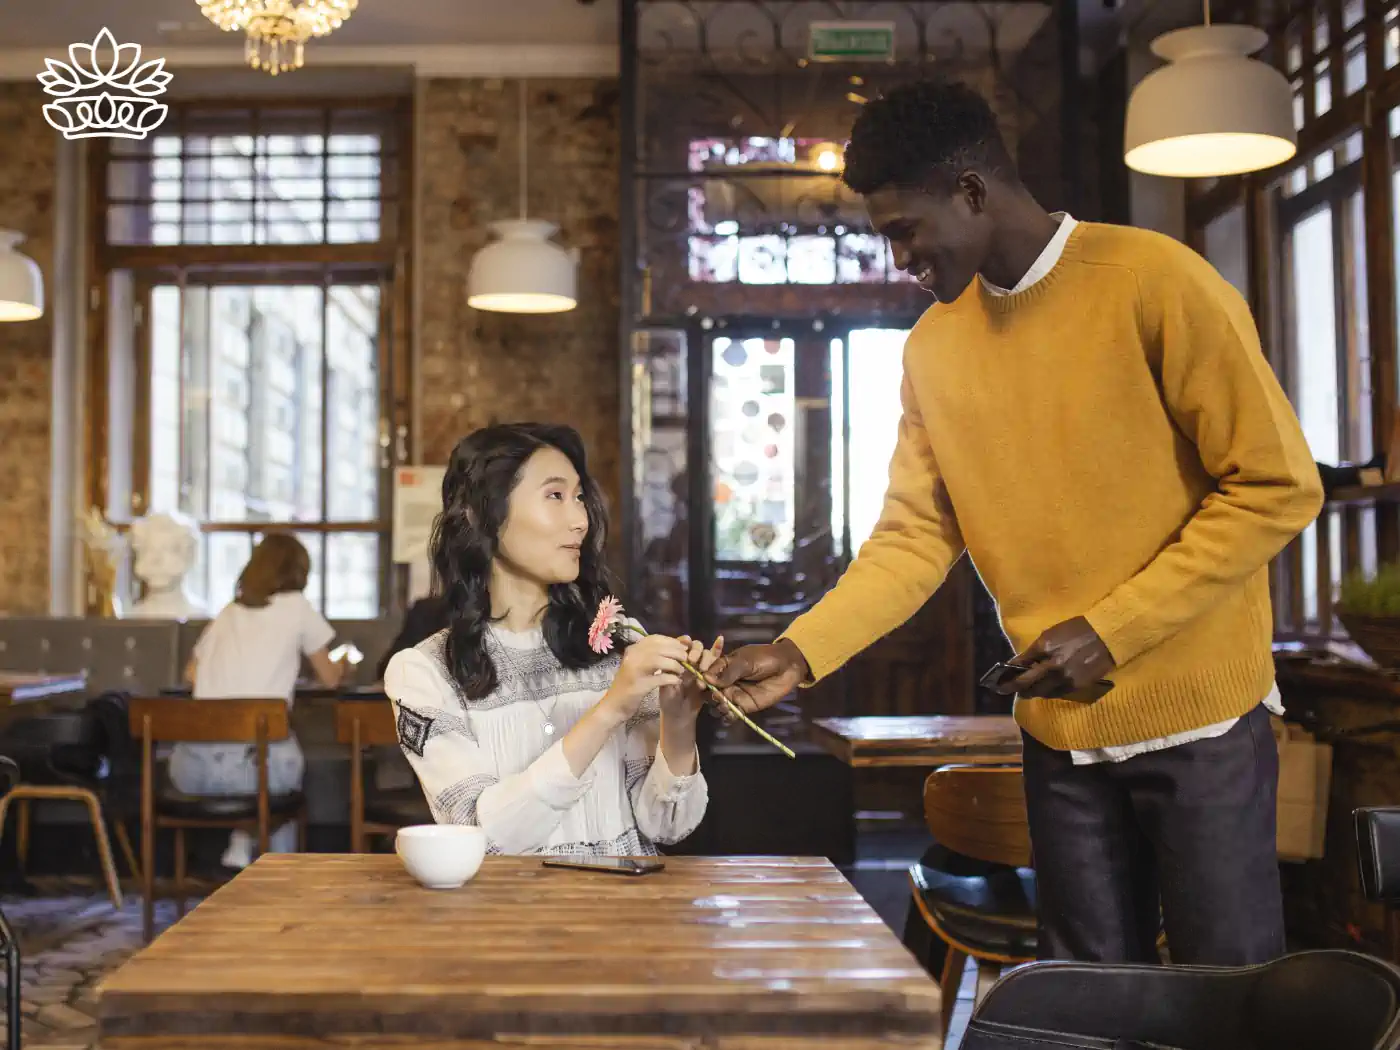 Young man in a yellow sweater presenting a delicate pink flower to a woman seated at a café table, capturing a moment of friendly exchange in a bustling coffee shop. Fabulous Flowers and Gifts - Thank You Flowers. Delivered with Heart